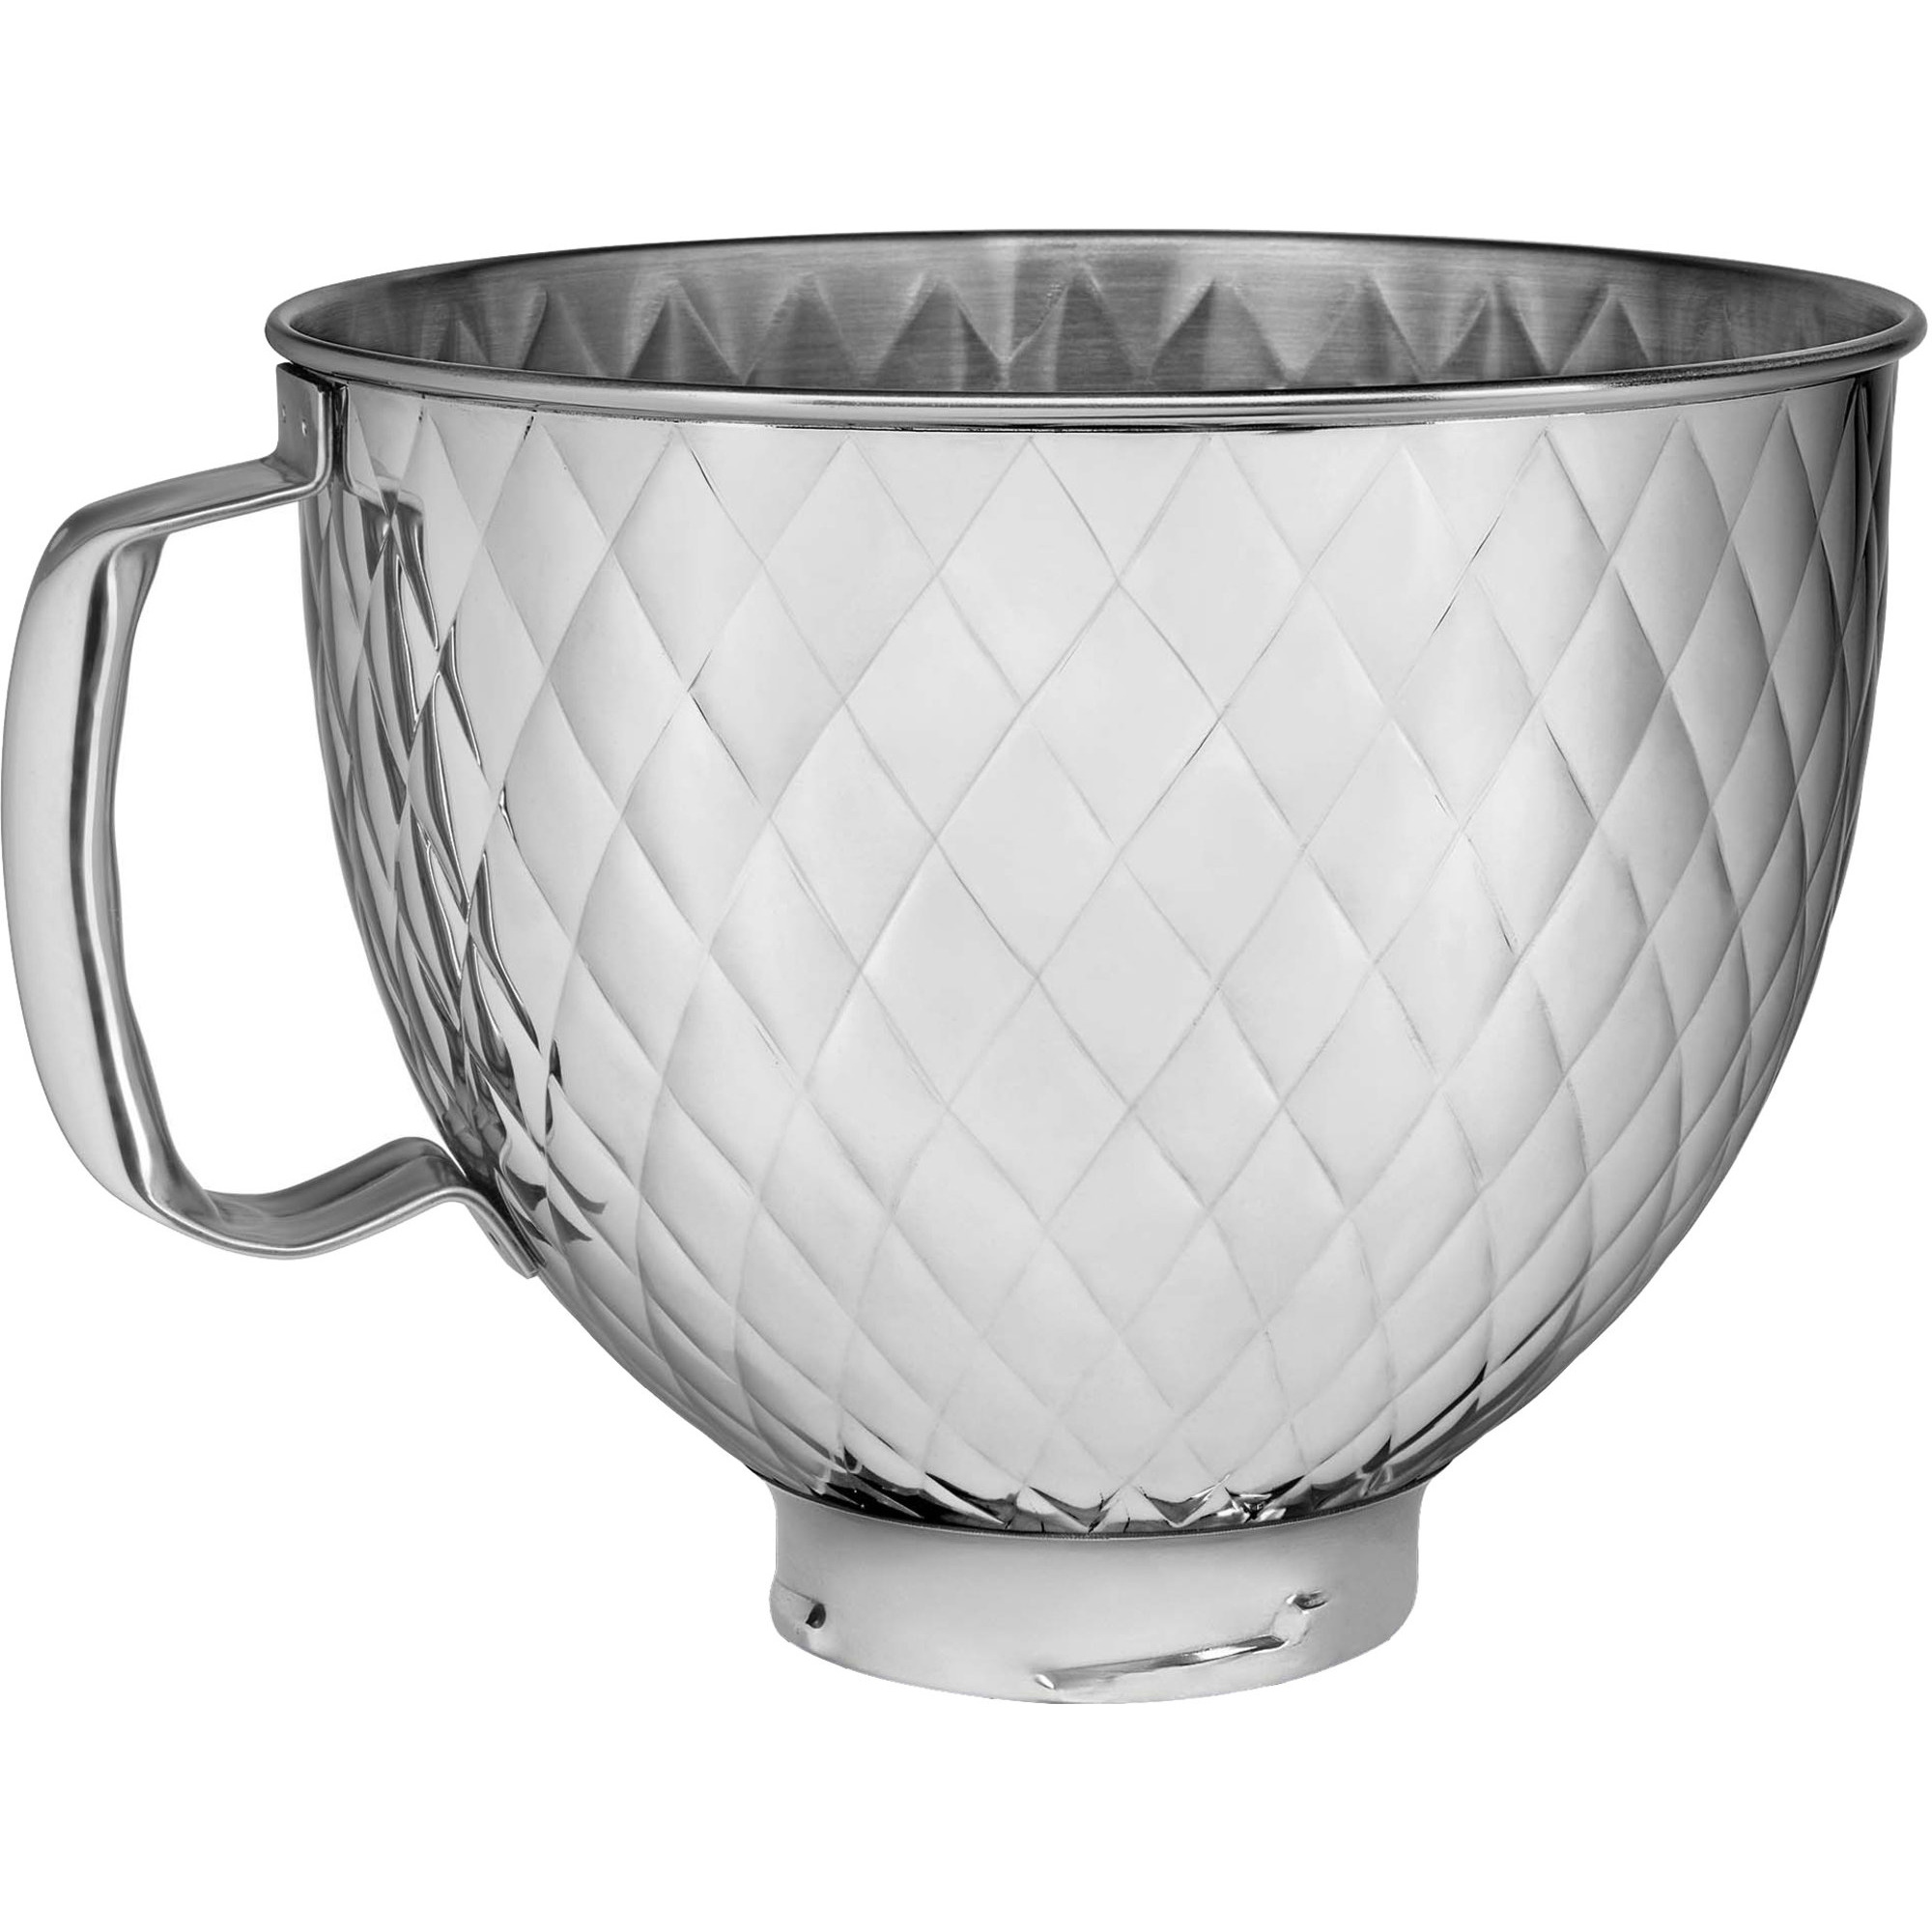 KitchenAid rustfri miksebolle  Quilted 4,7 L